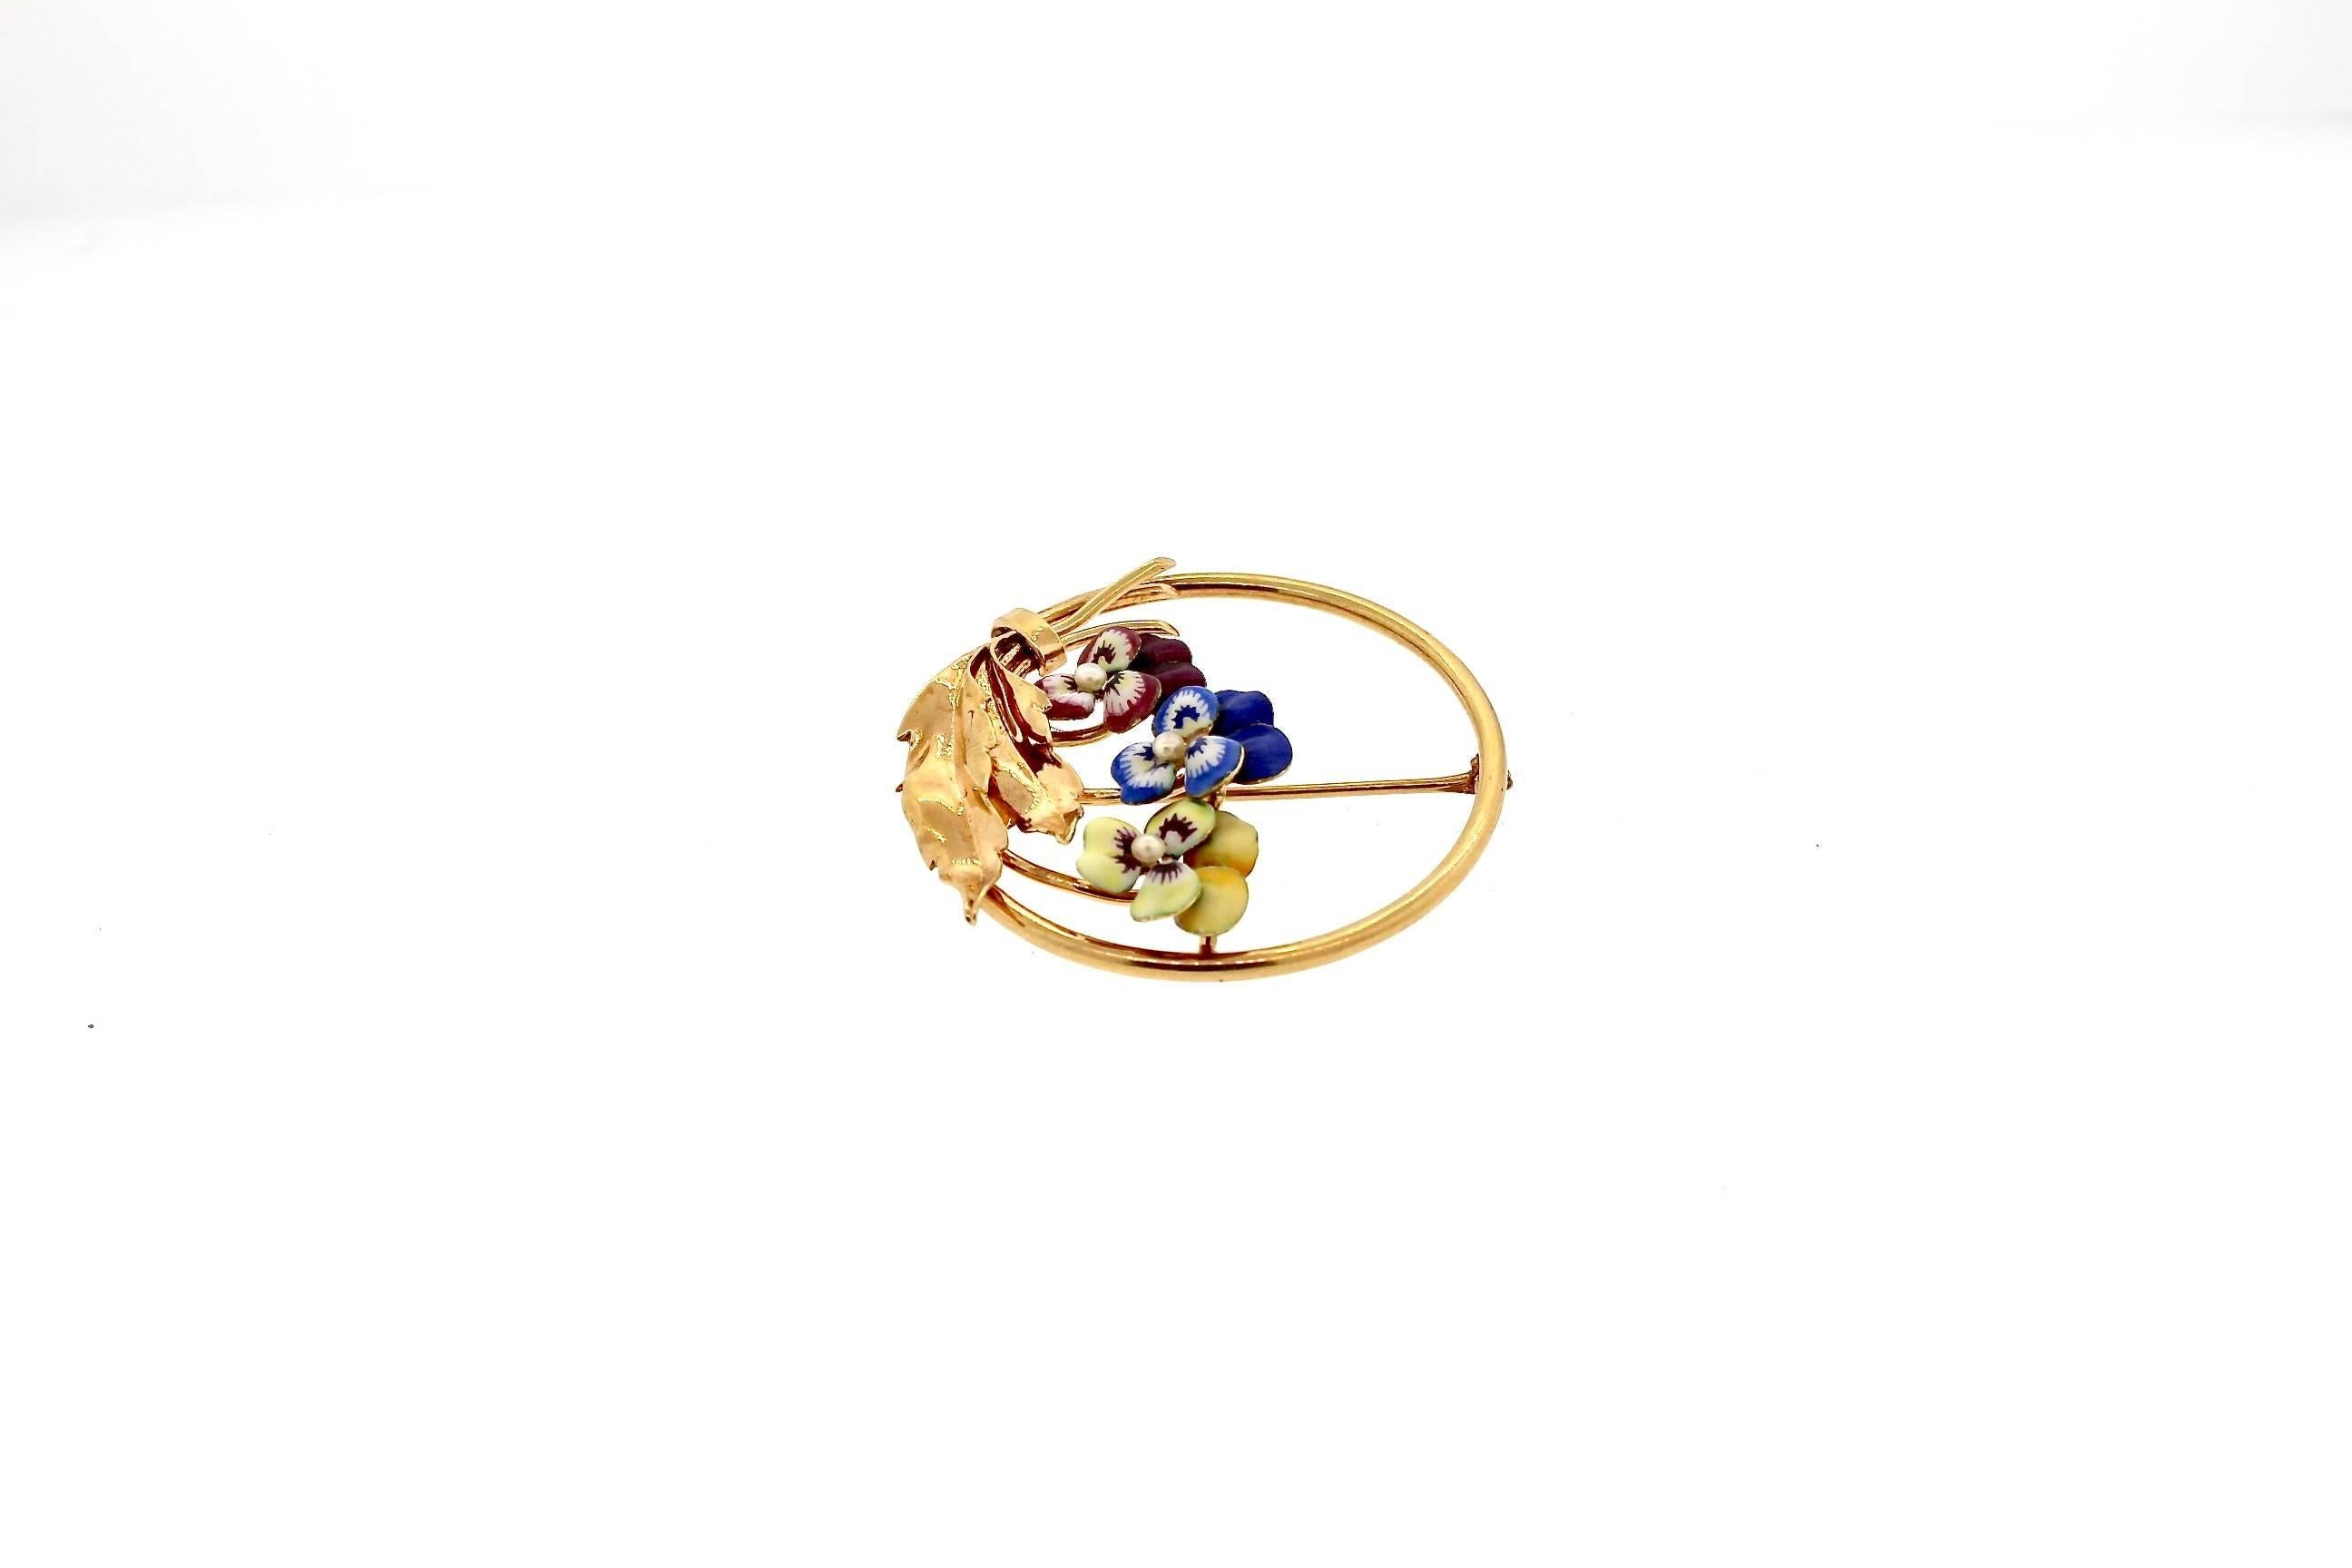 An  circular brooch that is accented by brightly colored enamel pansies.  This pin was made in the early 20th Century, around 1940.  It is made in 14k gold, typical of American jewelry at the time.  It was likely made by the manufacturers in the